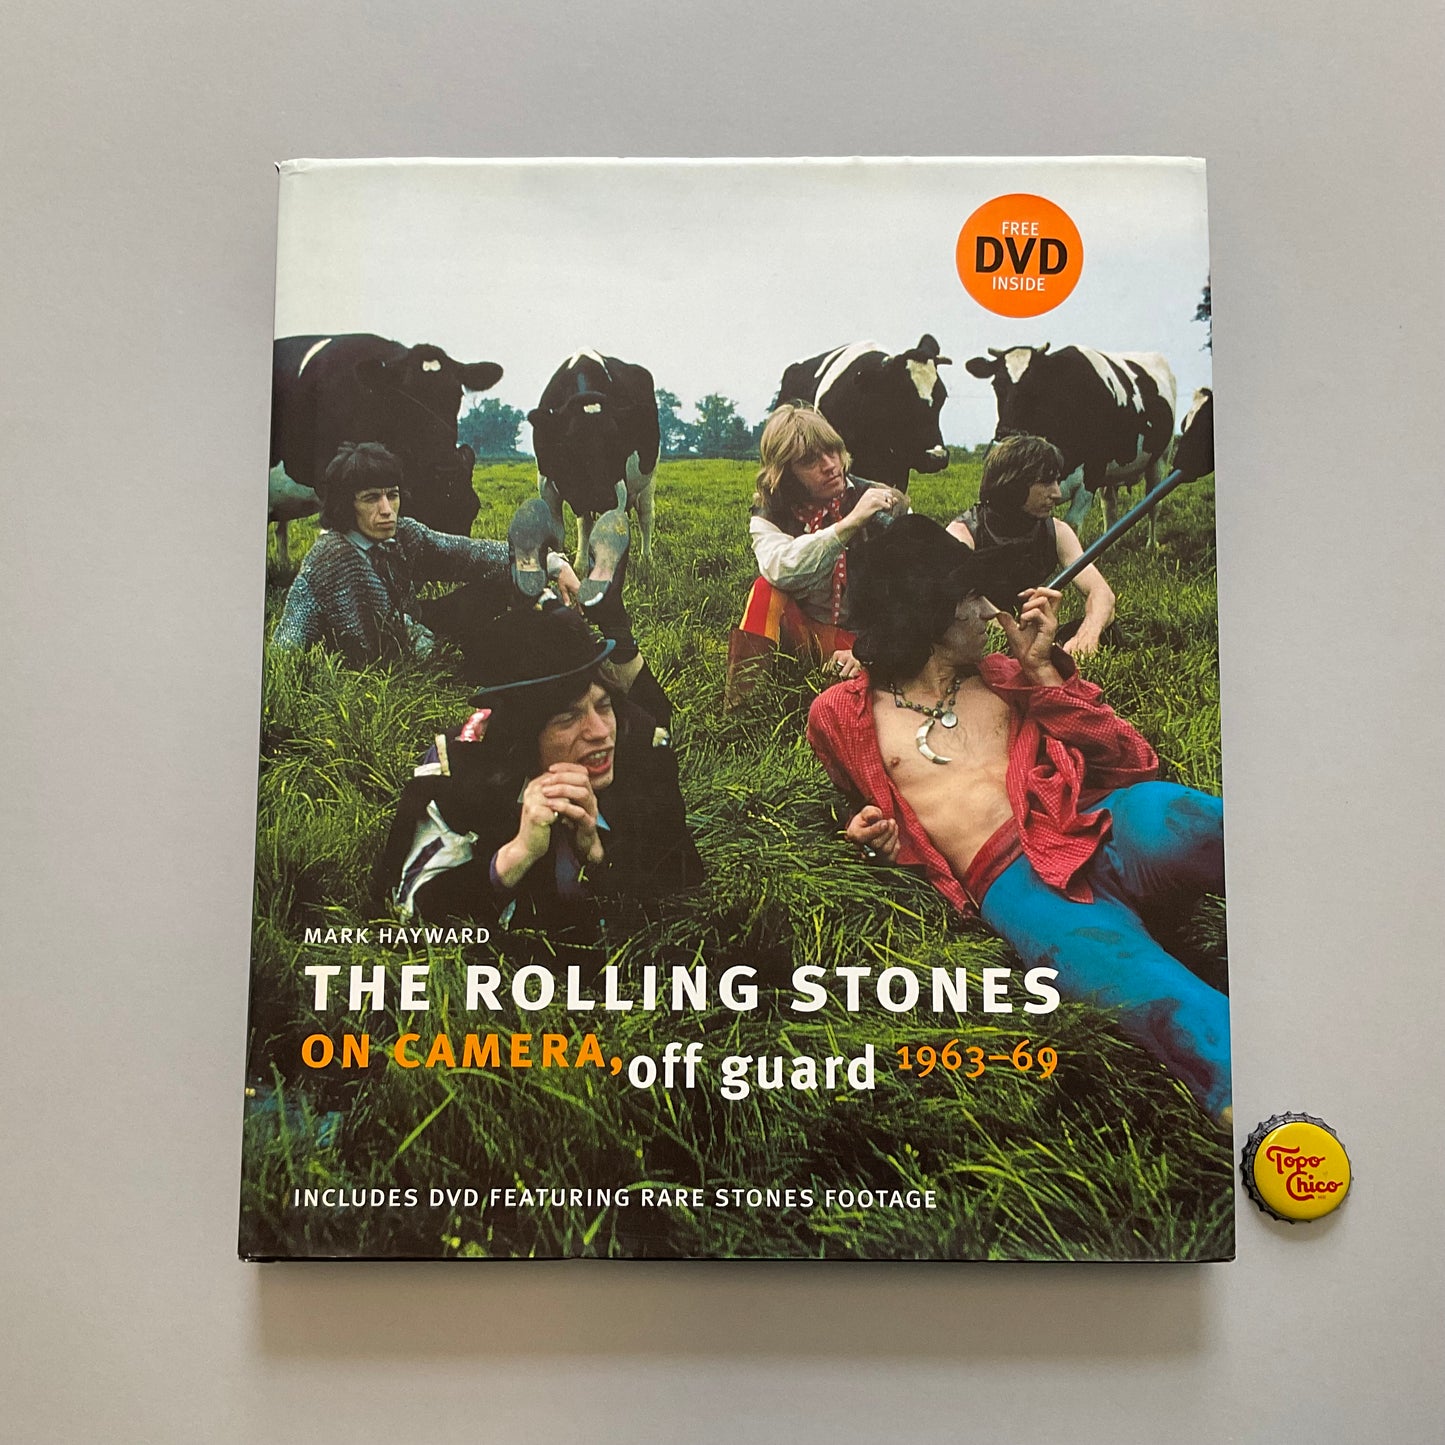 The Rolling Stones on Camera Book